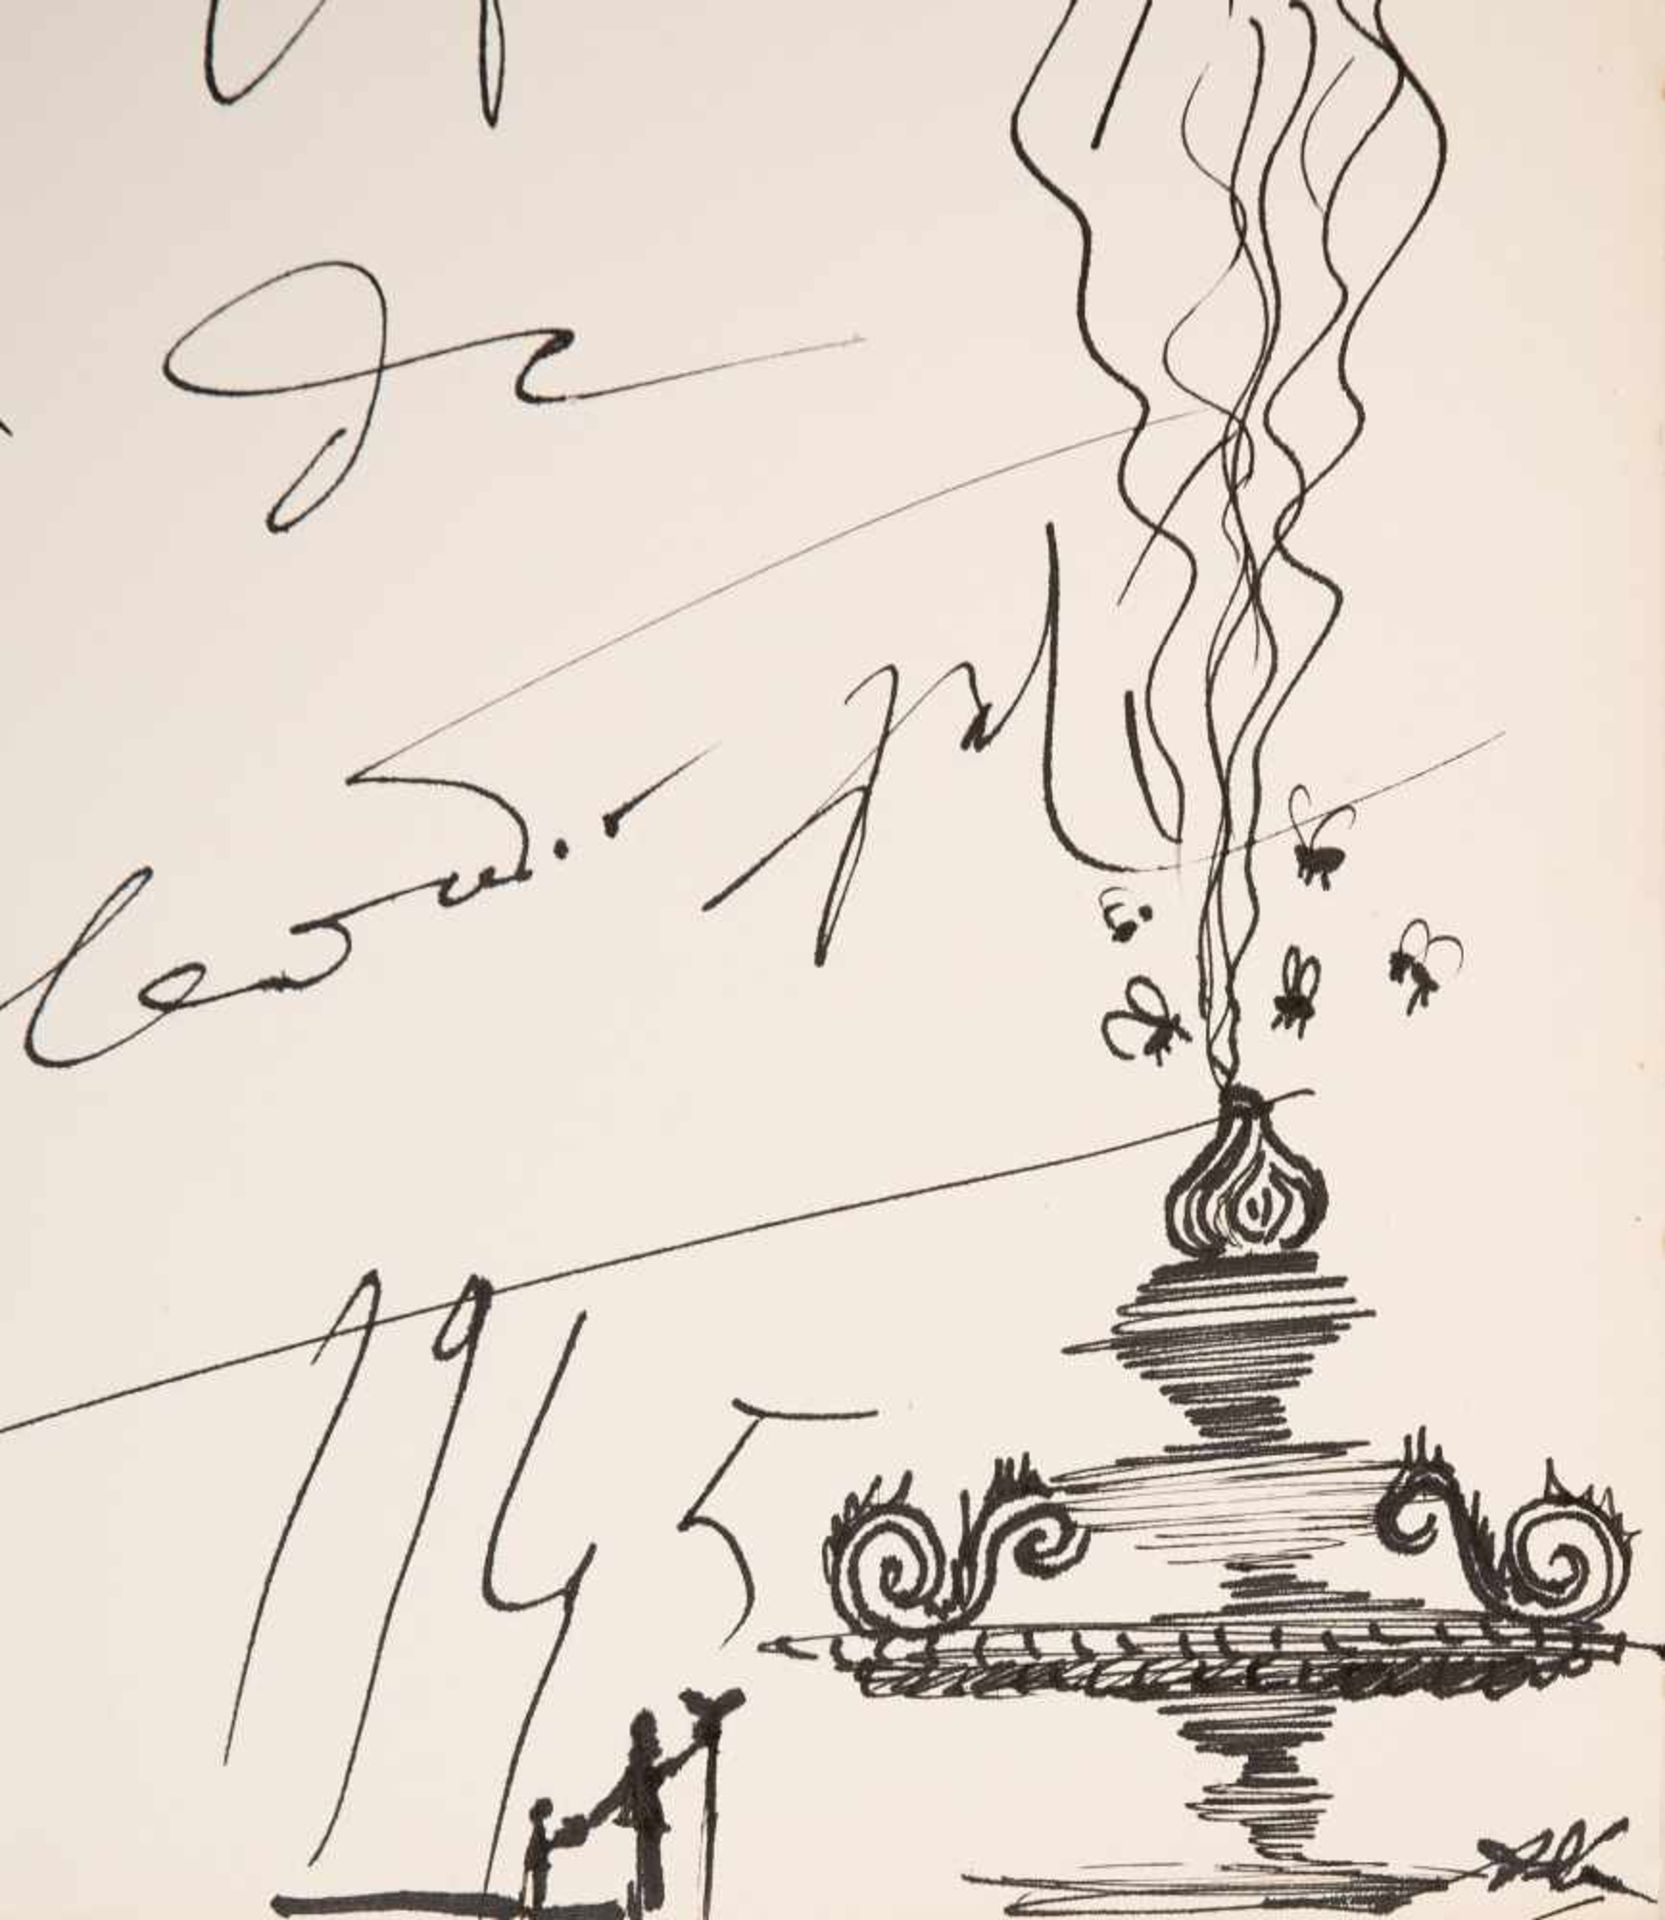 Salvador Dalí (Figueres, 1904 - 1989) Ink drawing on paper. Signed and dated in 1945. Drawn on the - Bild 2 aus 3